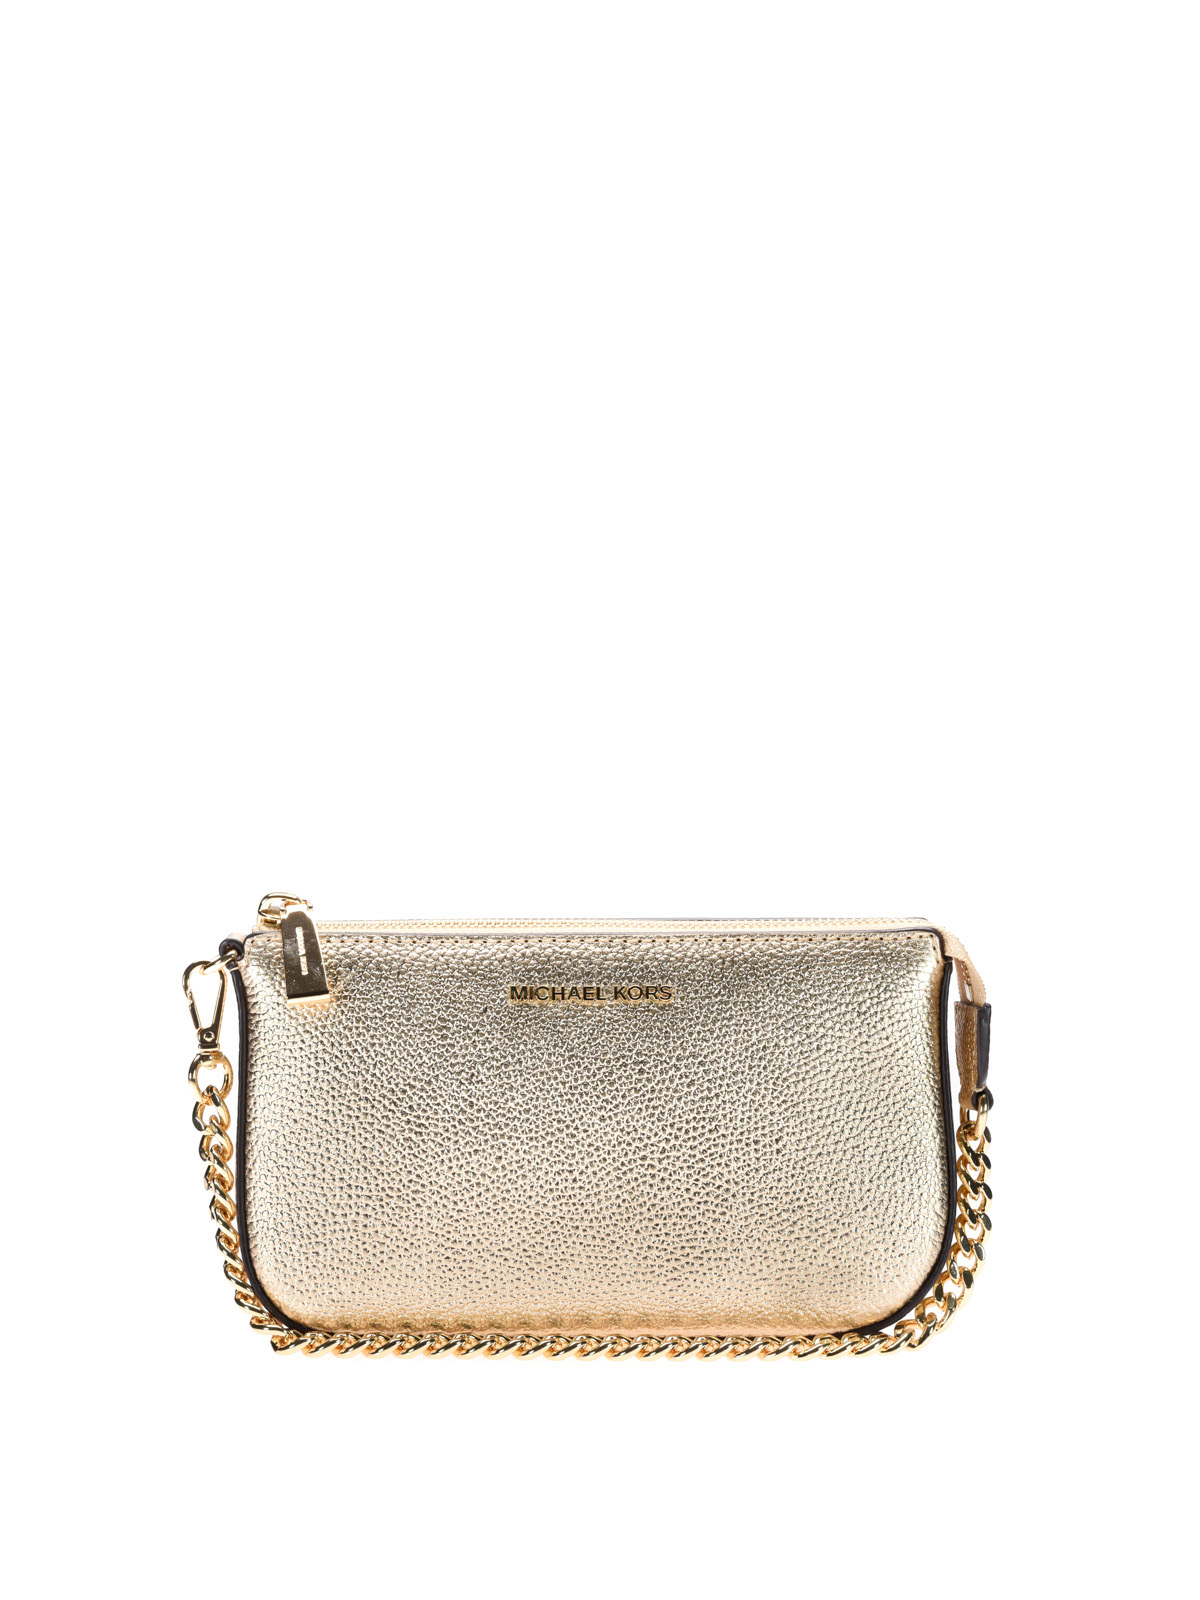 white and gold michael kors wallet